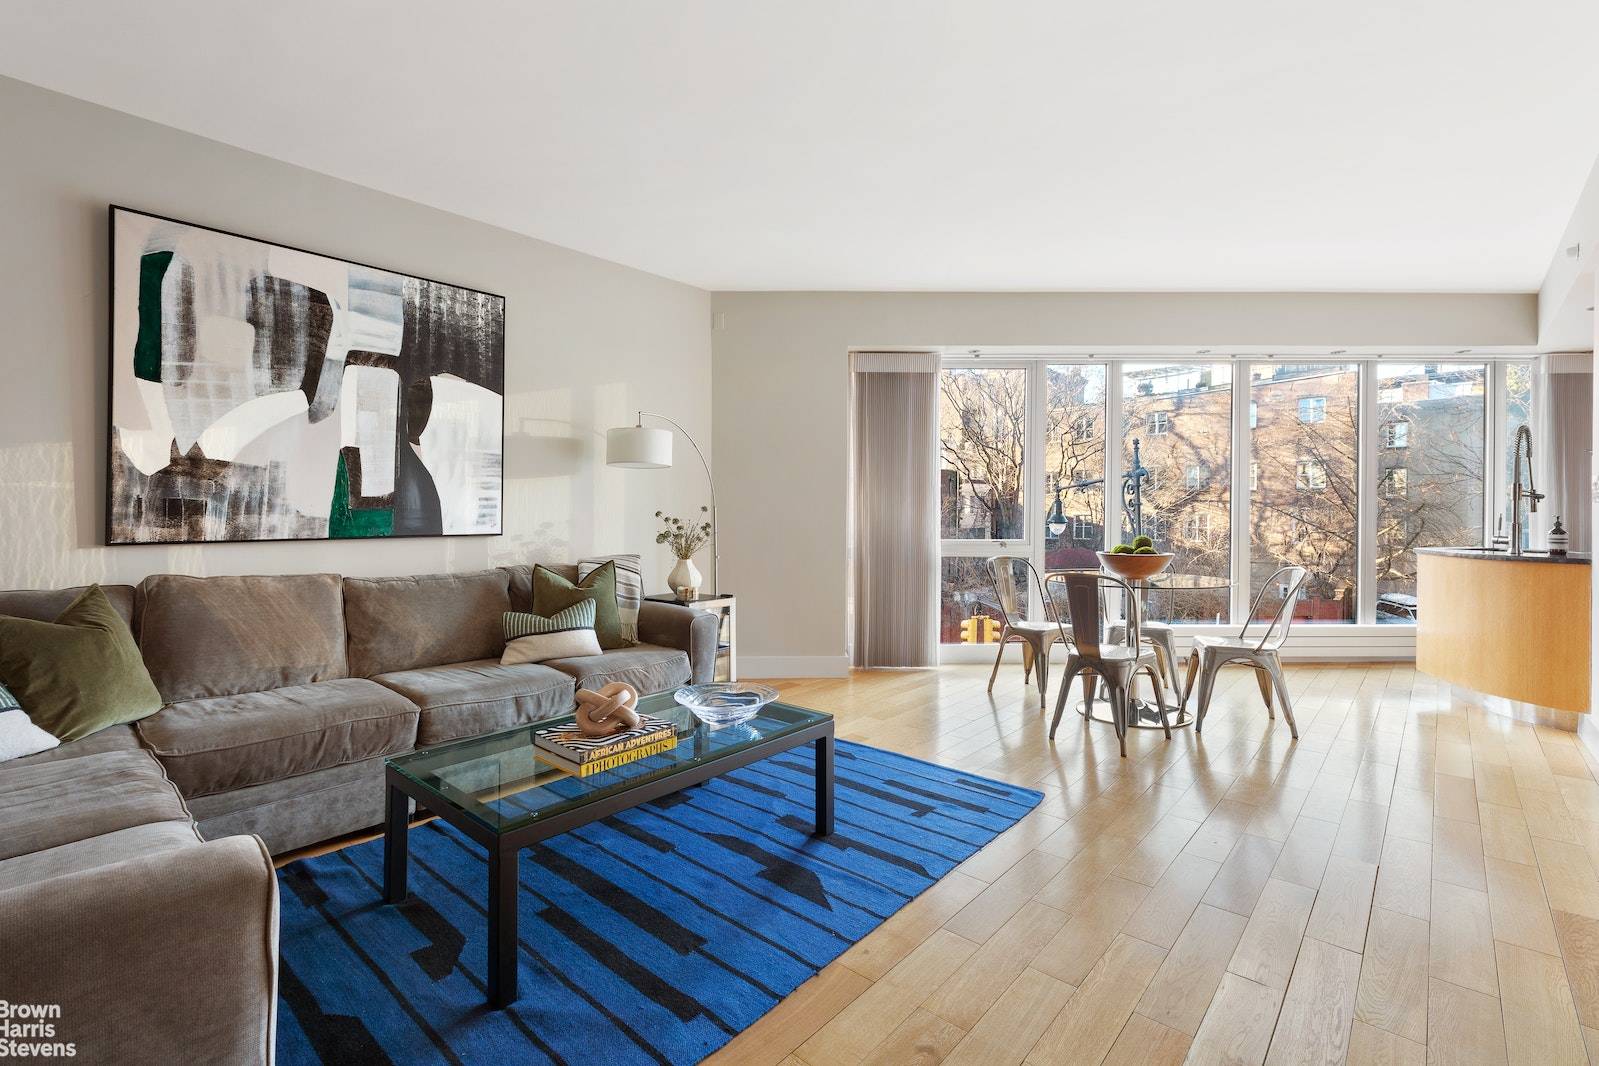 Welcome to Residence 3 at The Luminary, a haven of tranquility amidst the vibrant life of the West Village.